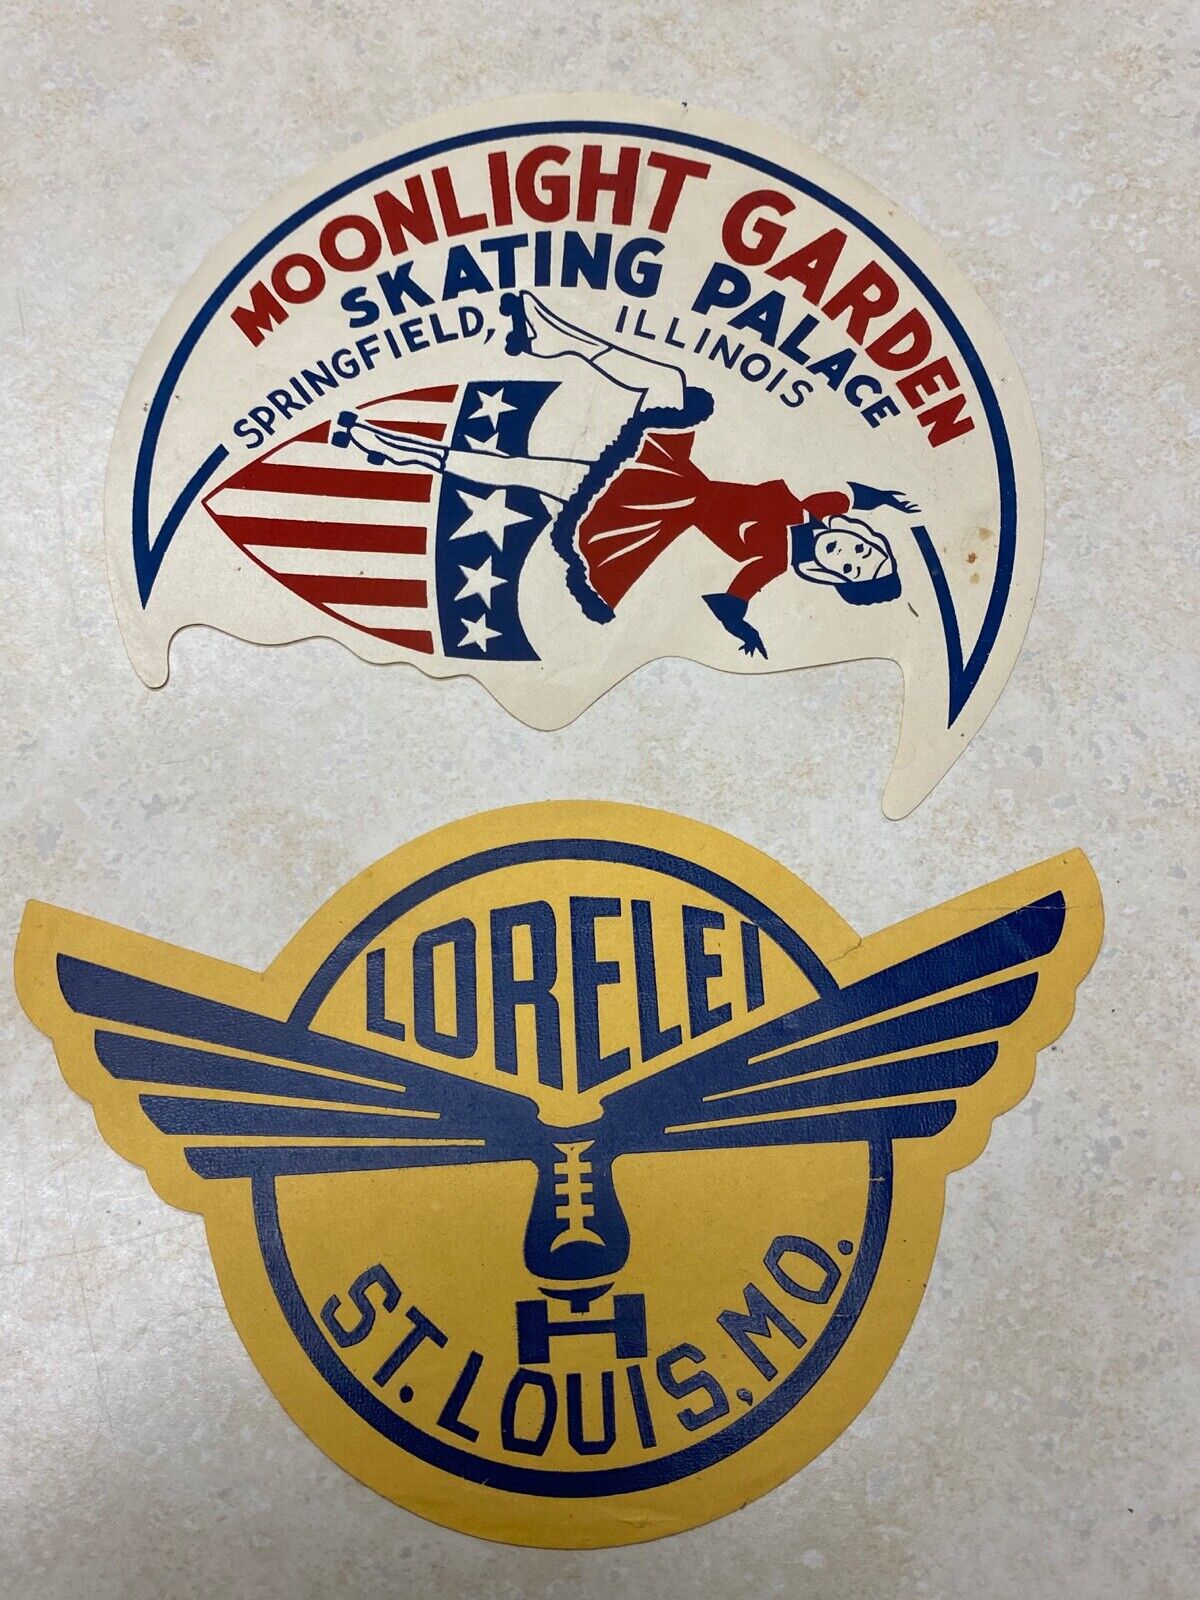 2 1930's Skating Rink Decals - St. Louis & Springfield Illinois